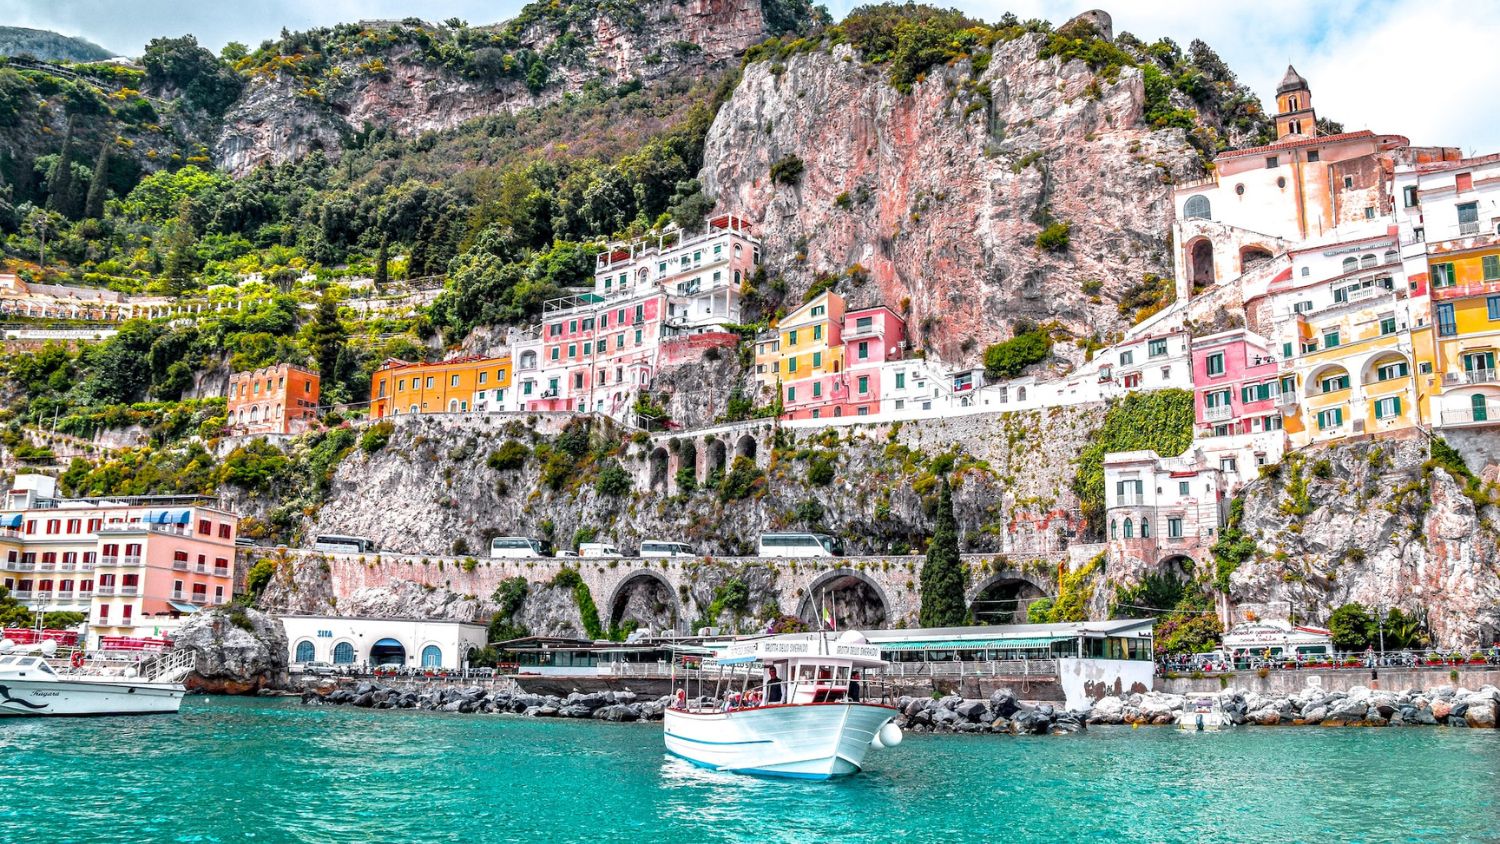 How to Plan a Trip to Italy’s Amalfi Coast — Best Seaside Towns, Hotels, and Tastiest Restaurants Included